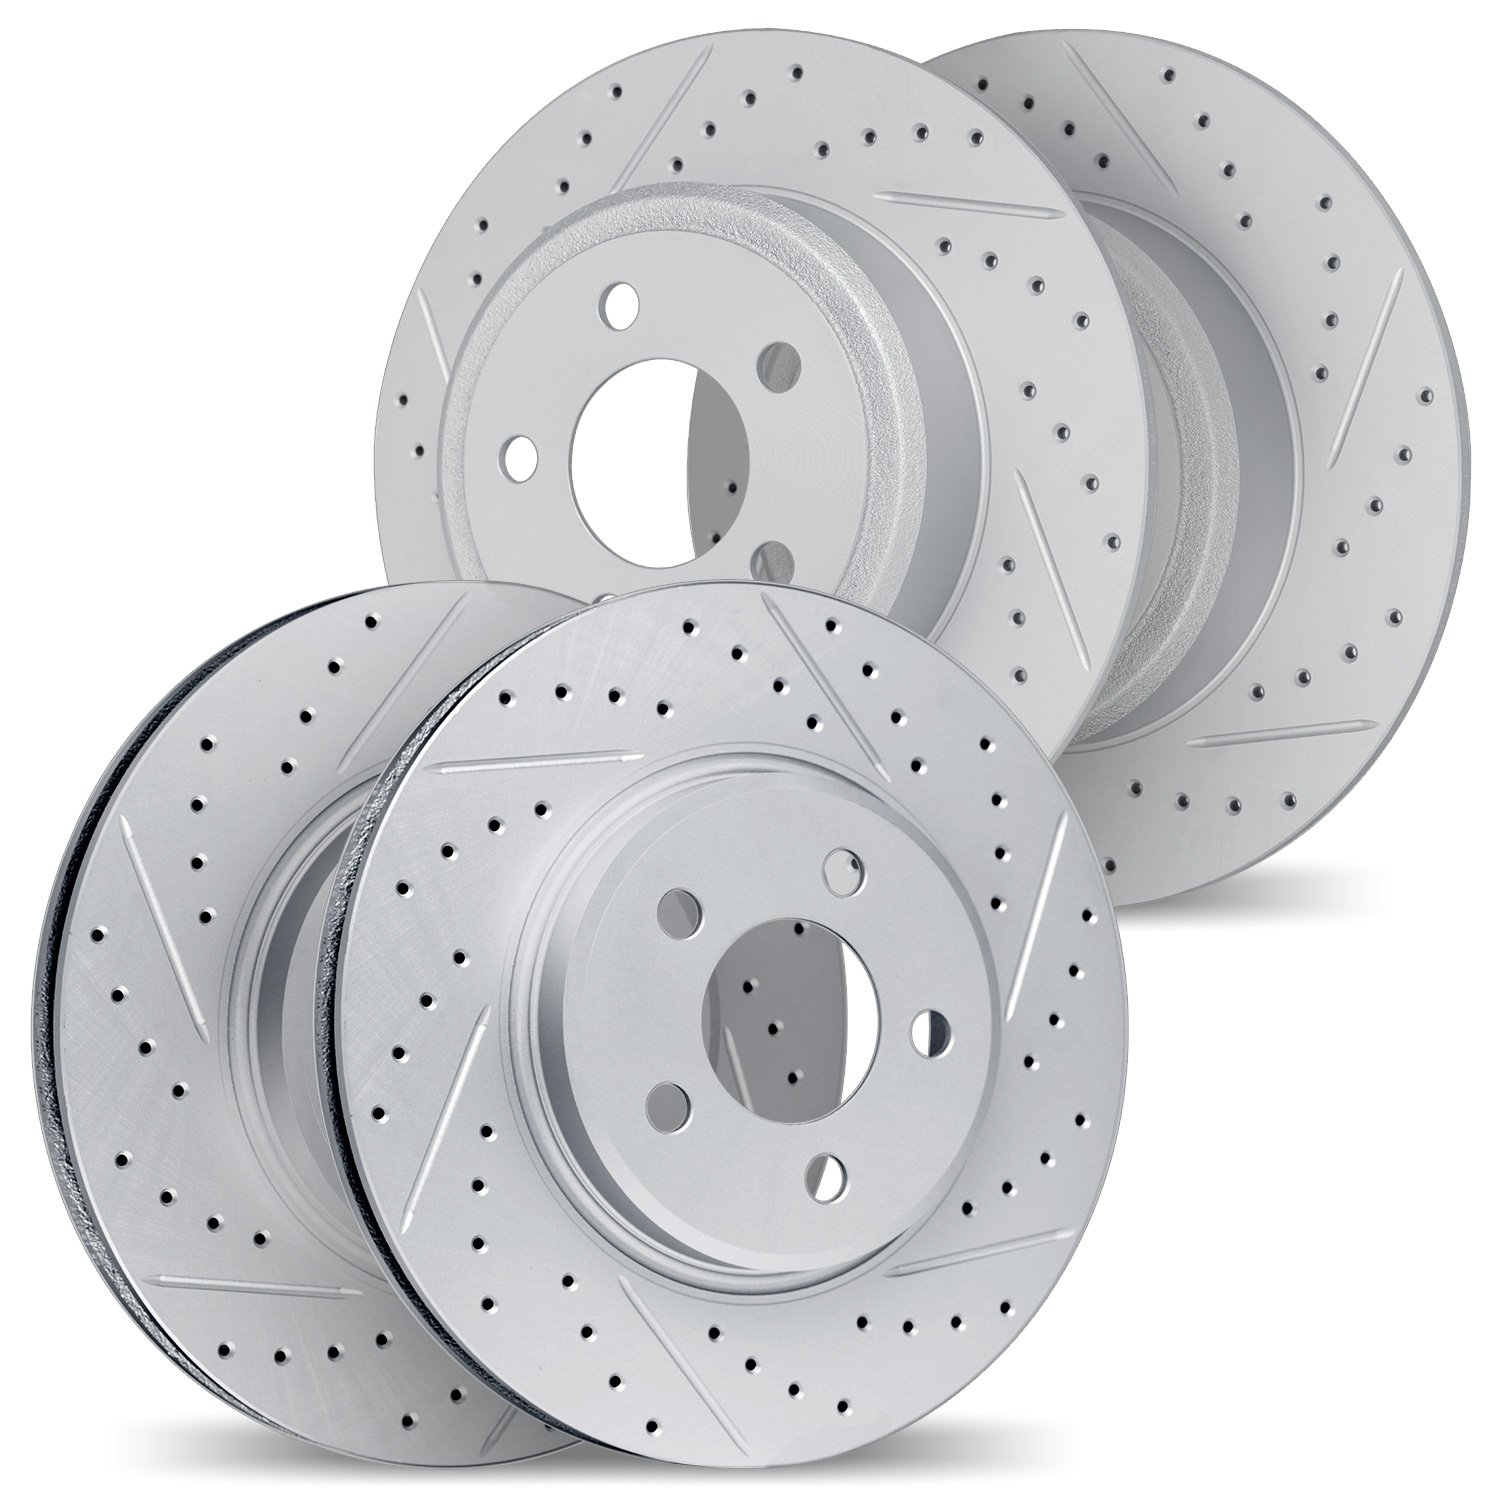 2004-80009 Geoperformance Drilled/Slotted Brake Rotors, 2014-2016 Ford/Lincoln/Mercury/Mazda, Position: Front and Rear